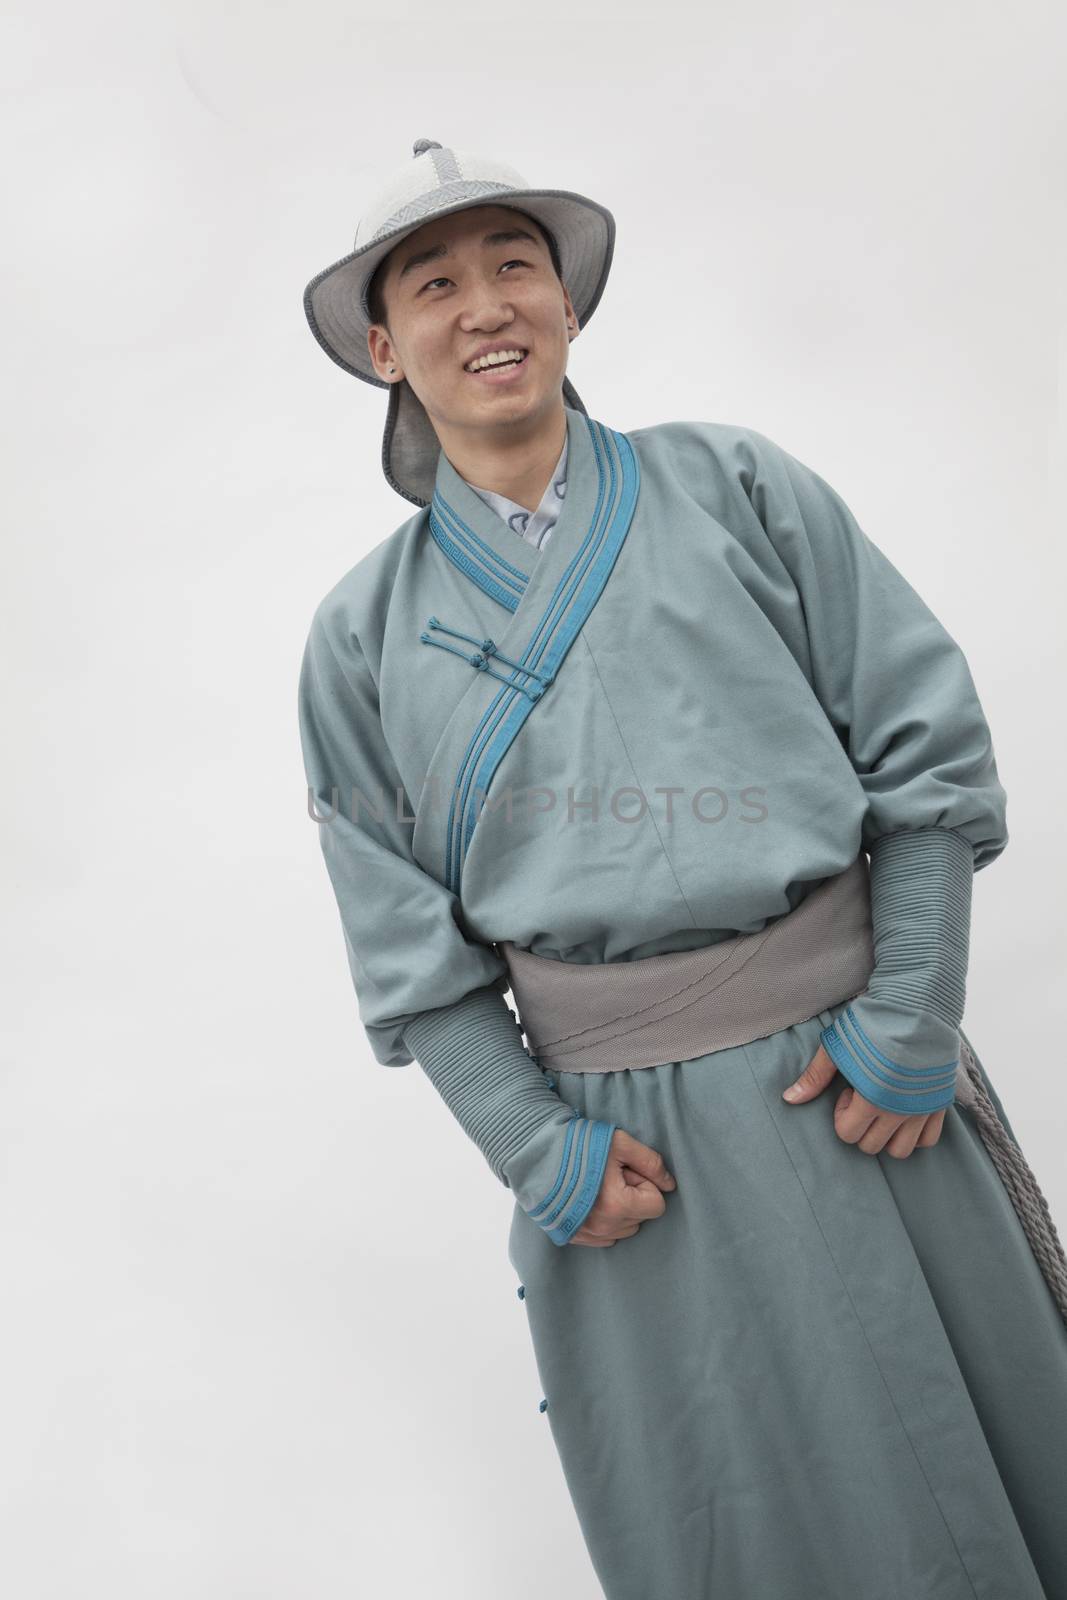 Portrait of smiling young man in traditional clothing, studio shot